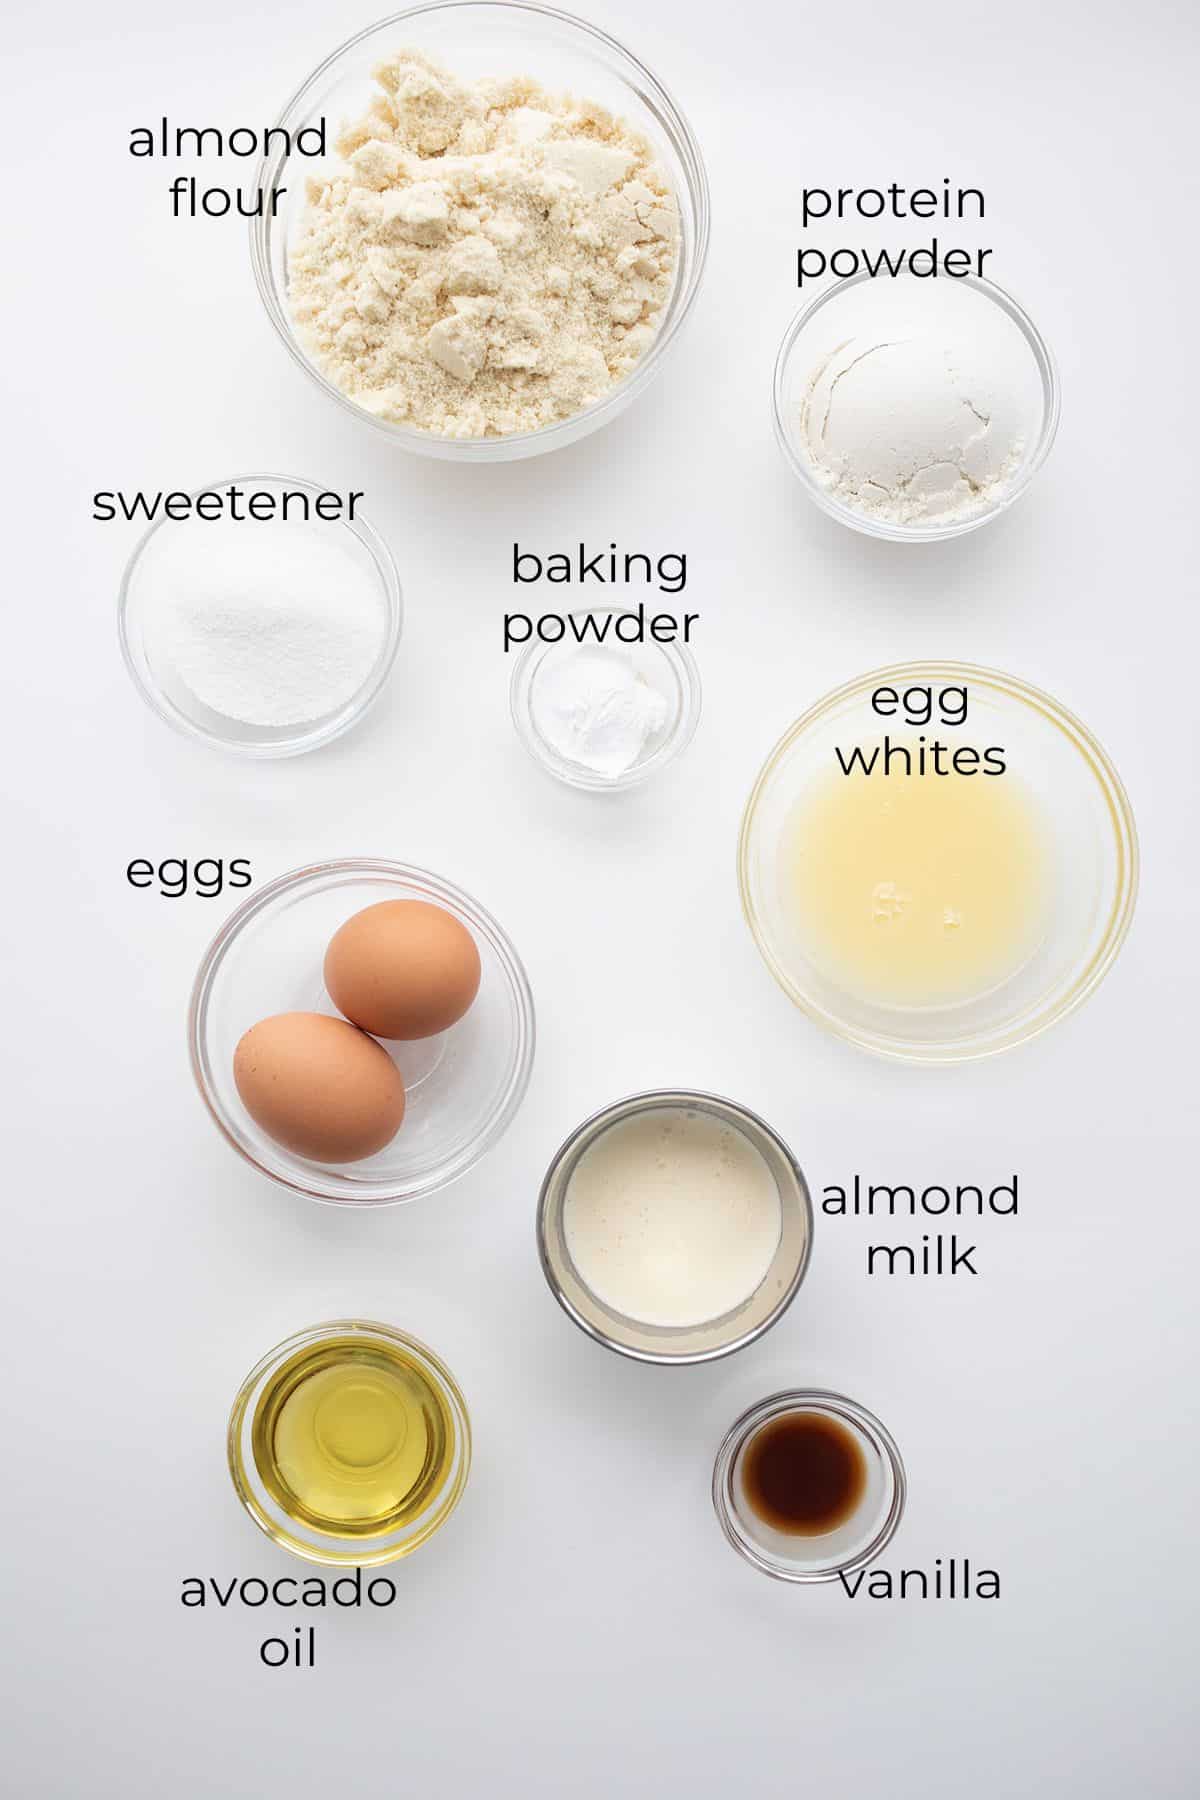 Top down image of the ingredients needed for keto waffles.